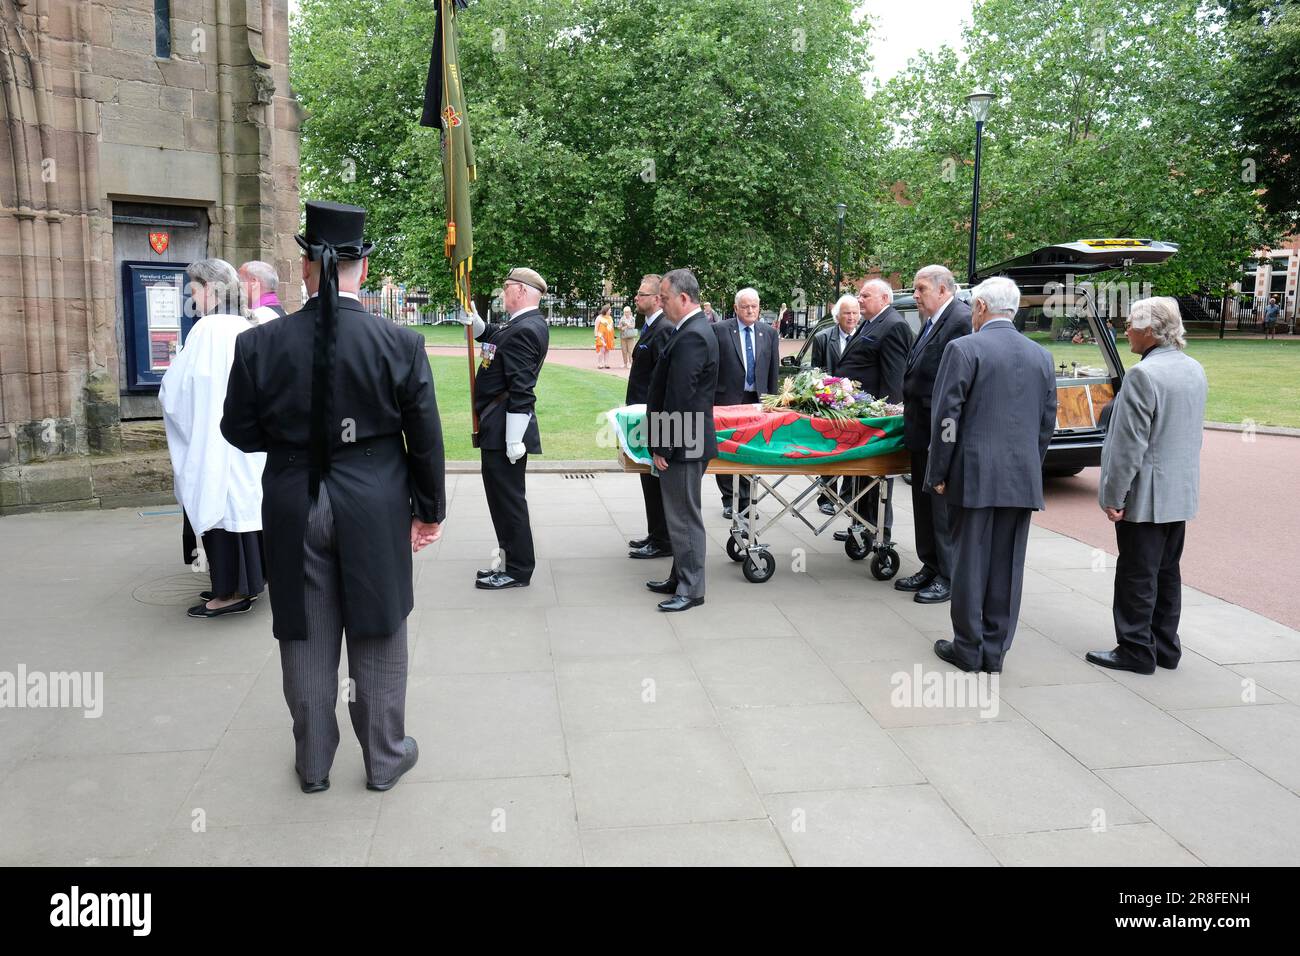 Hereford Cathedral, Hereford, Herefordshire, UK – Wednesday 21st June 2023 – The funeral of Mel Parry QGM took place this afternoon at Hereford Cathedral. Mel Parry was awarded the Queens Gallantry Medal ( QGM ) for his role in the Special Air Service ( 22 SAS Regt ) assault on the Iranian embassy in London on 5th May 1980 to free hostages being held by six gunmen. Photo Steven May / Alamy Live News Stock Photo